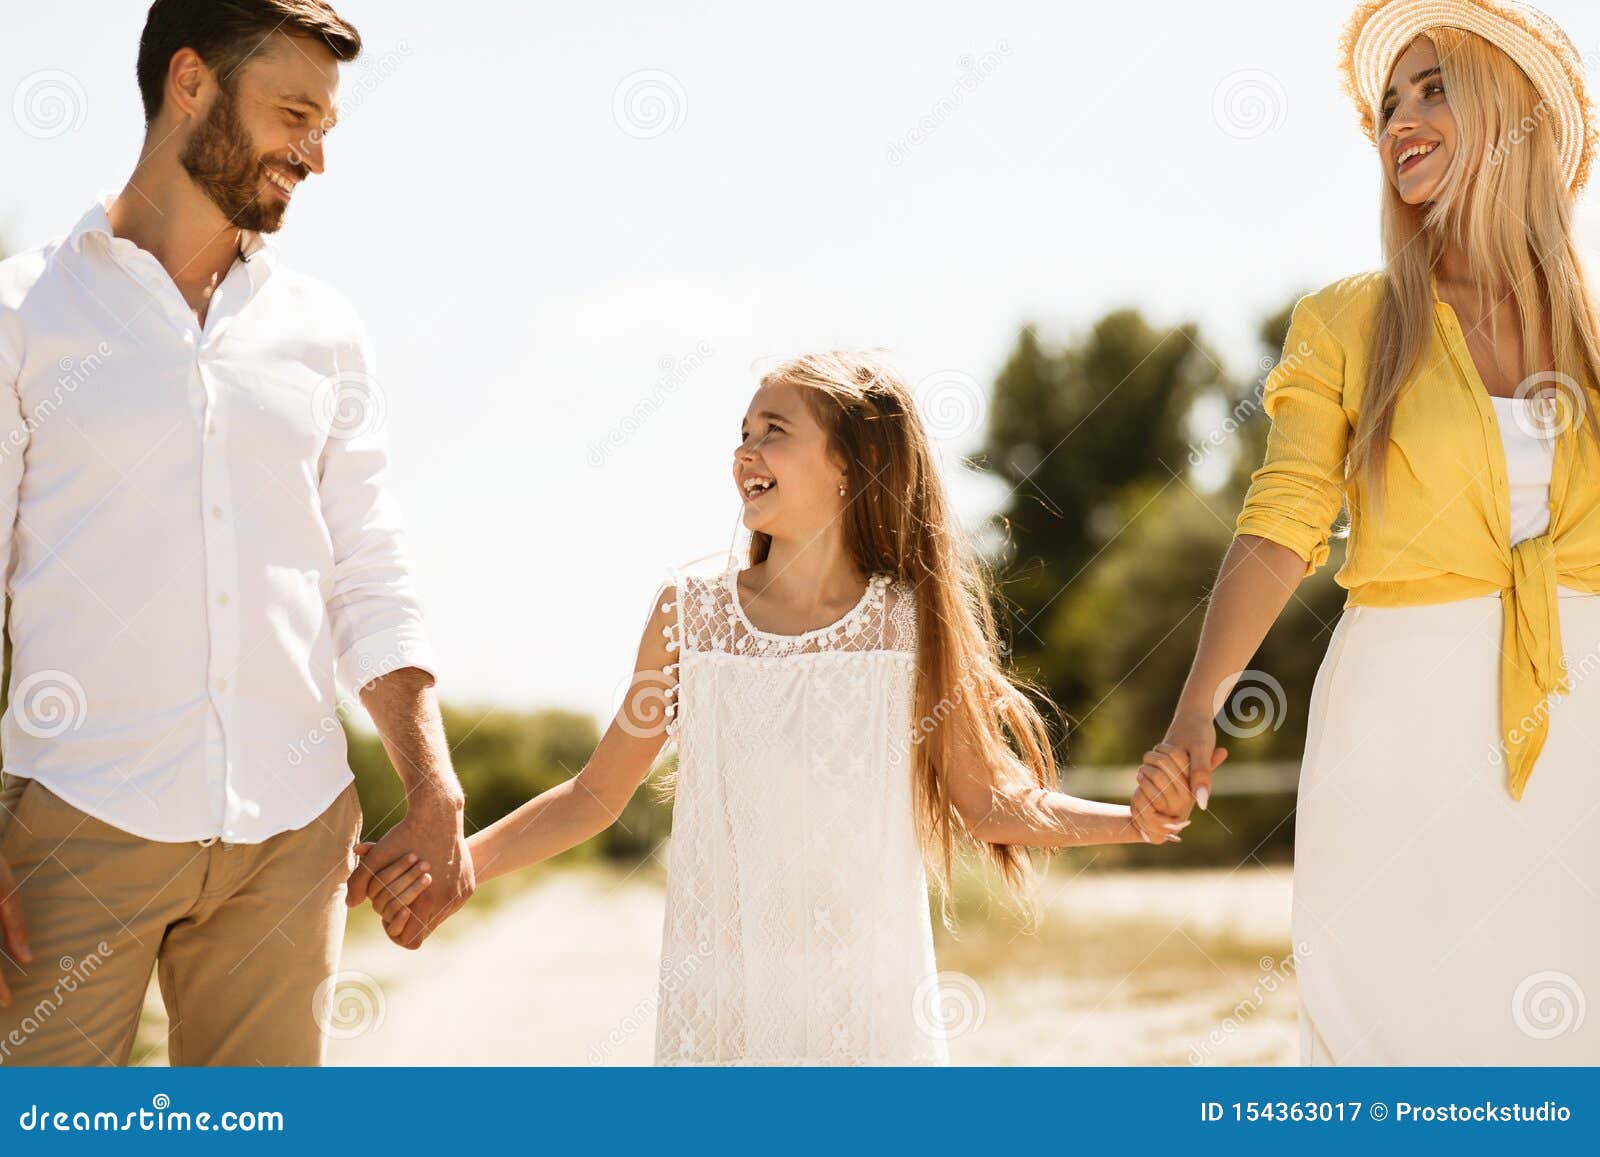 Parents And Child Walking Holding Hands Outdoors Stock Image Image Of Father Countryside